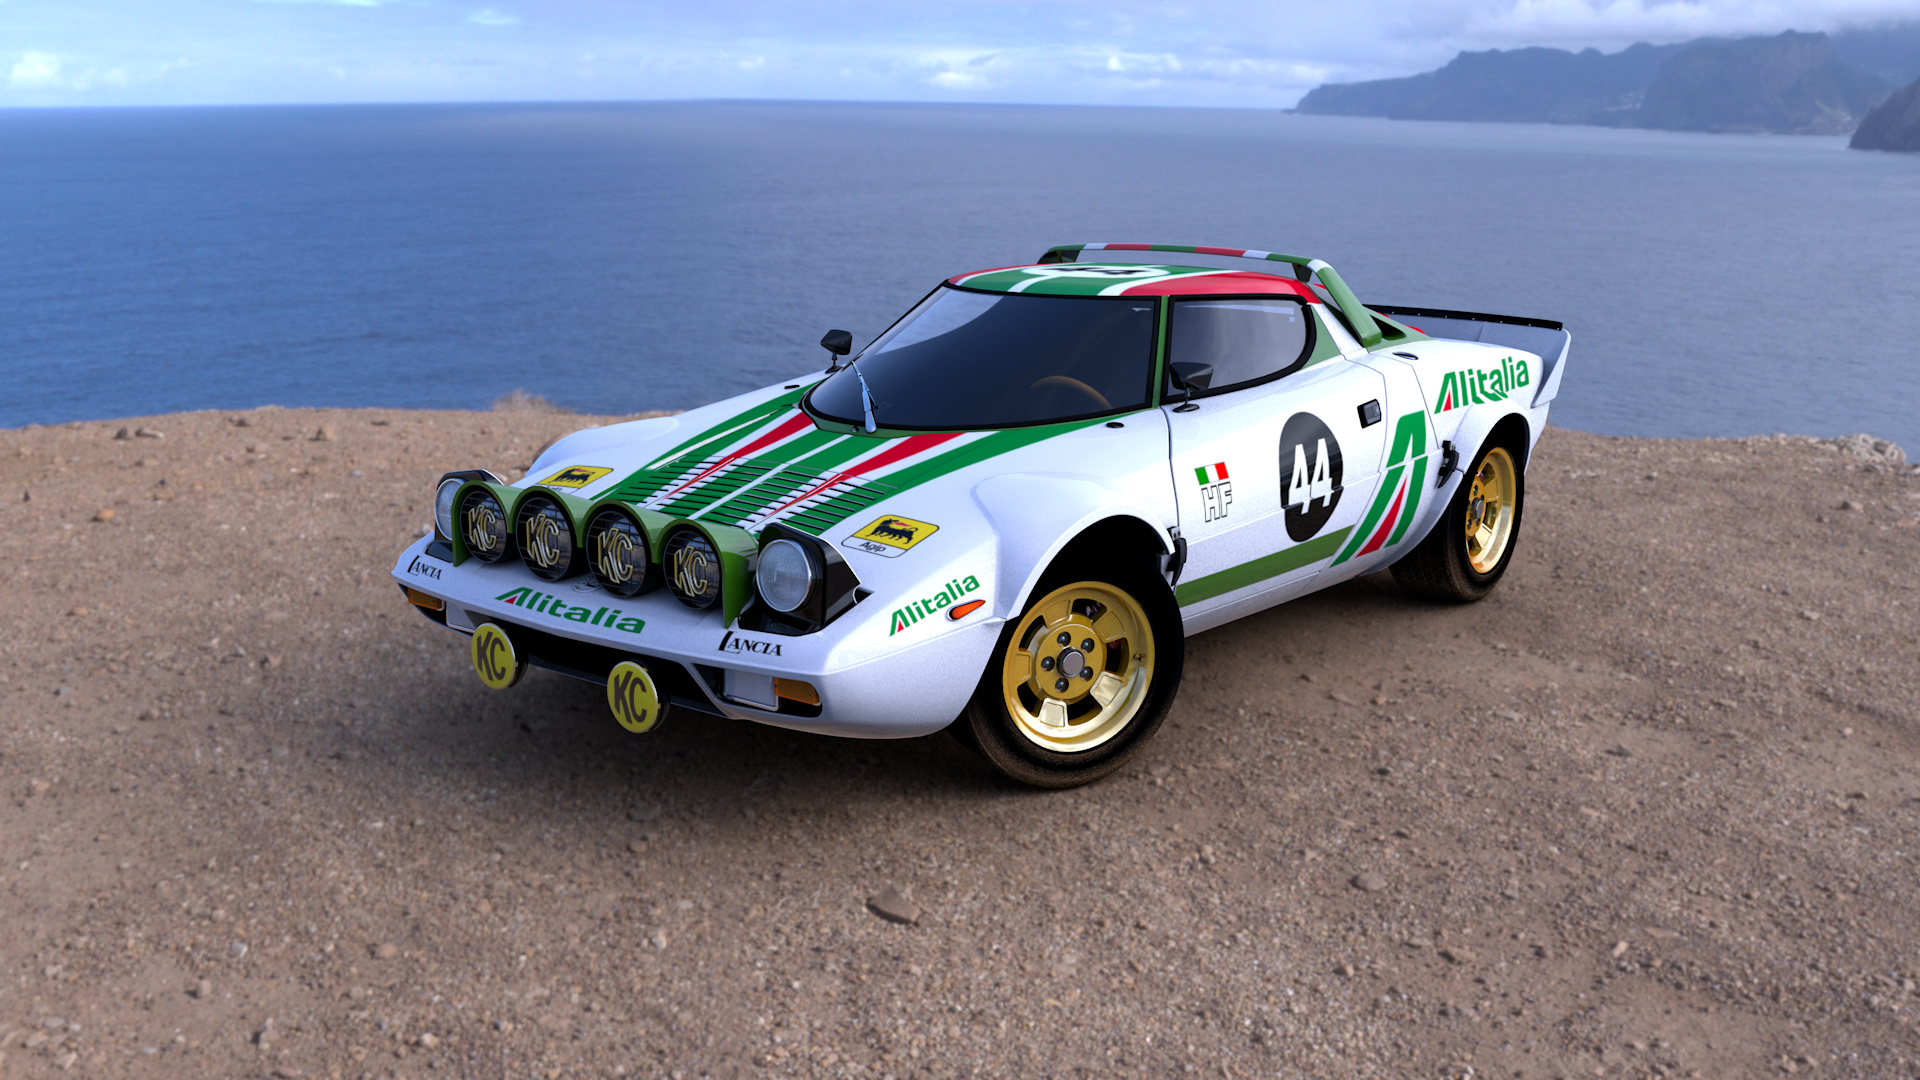 Lancia Stratos wallpapers, HQ pictures, 1920x1080 Full HD Desktop